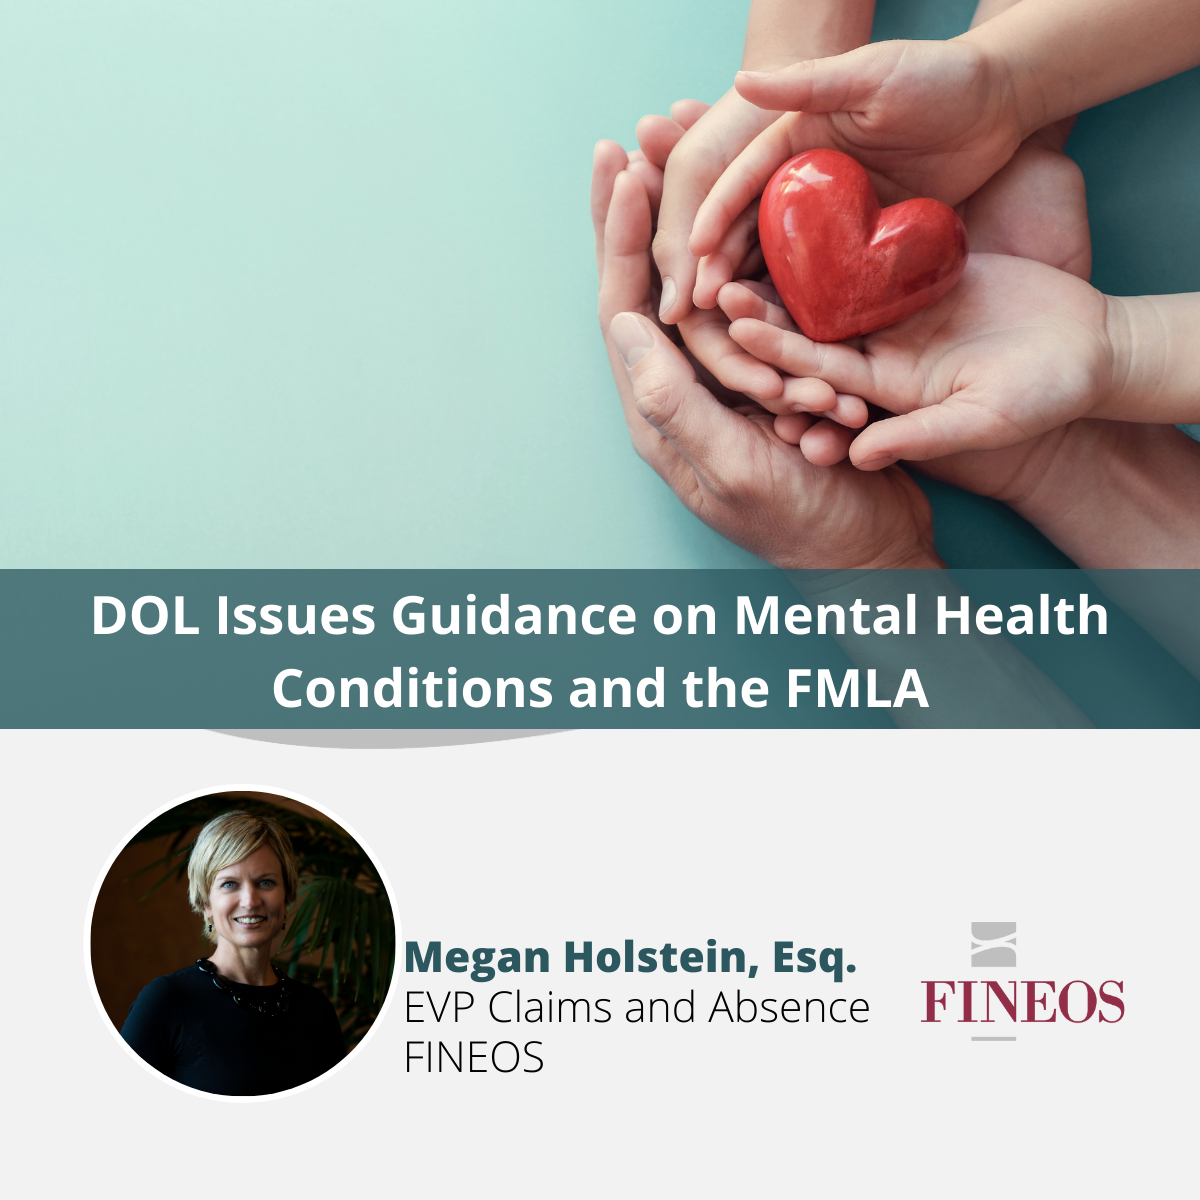 DOL Issues Guidance on Mental Health Conditions and the FMLA